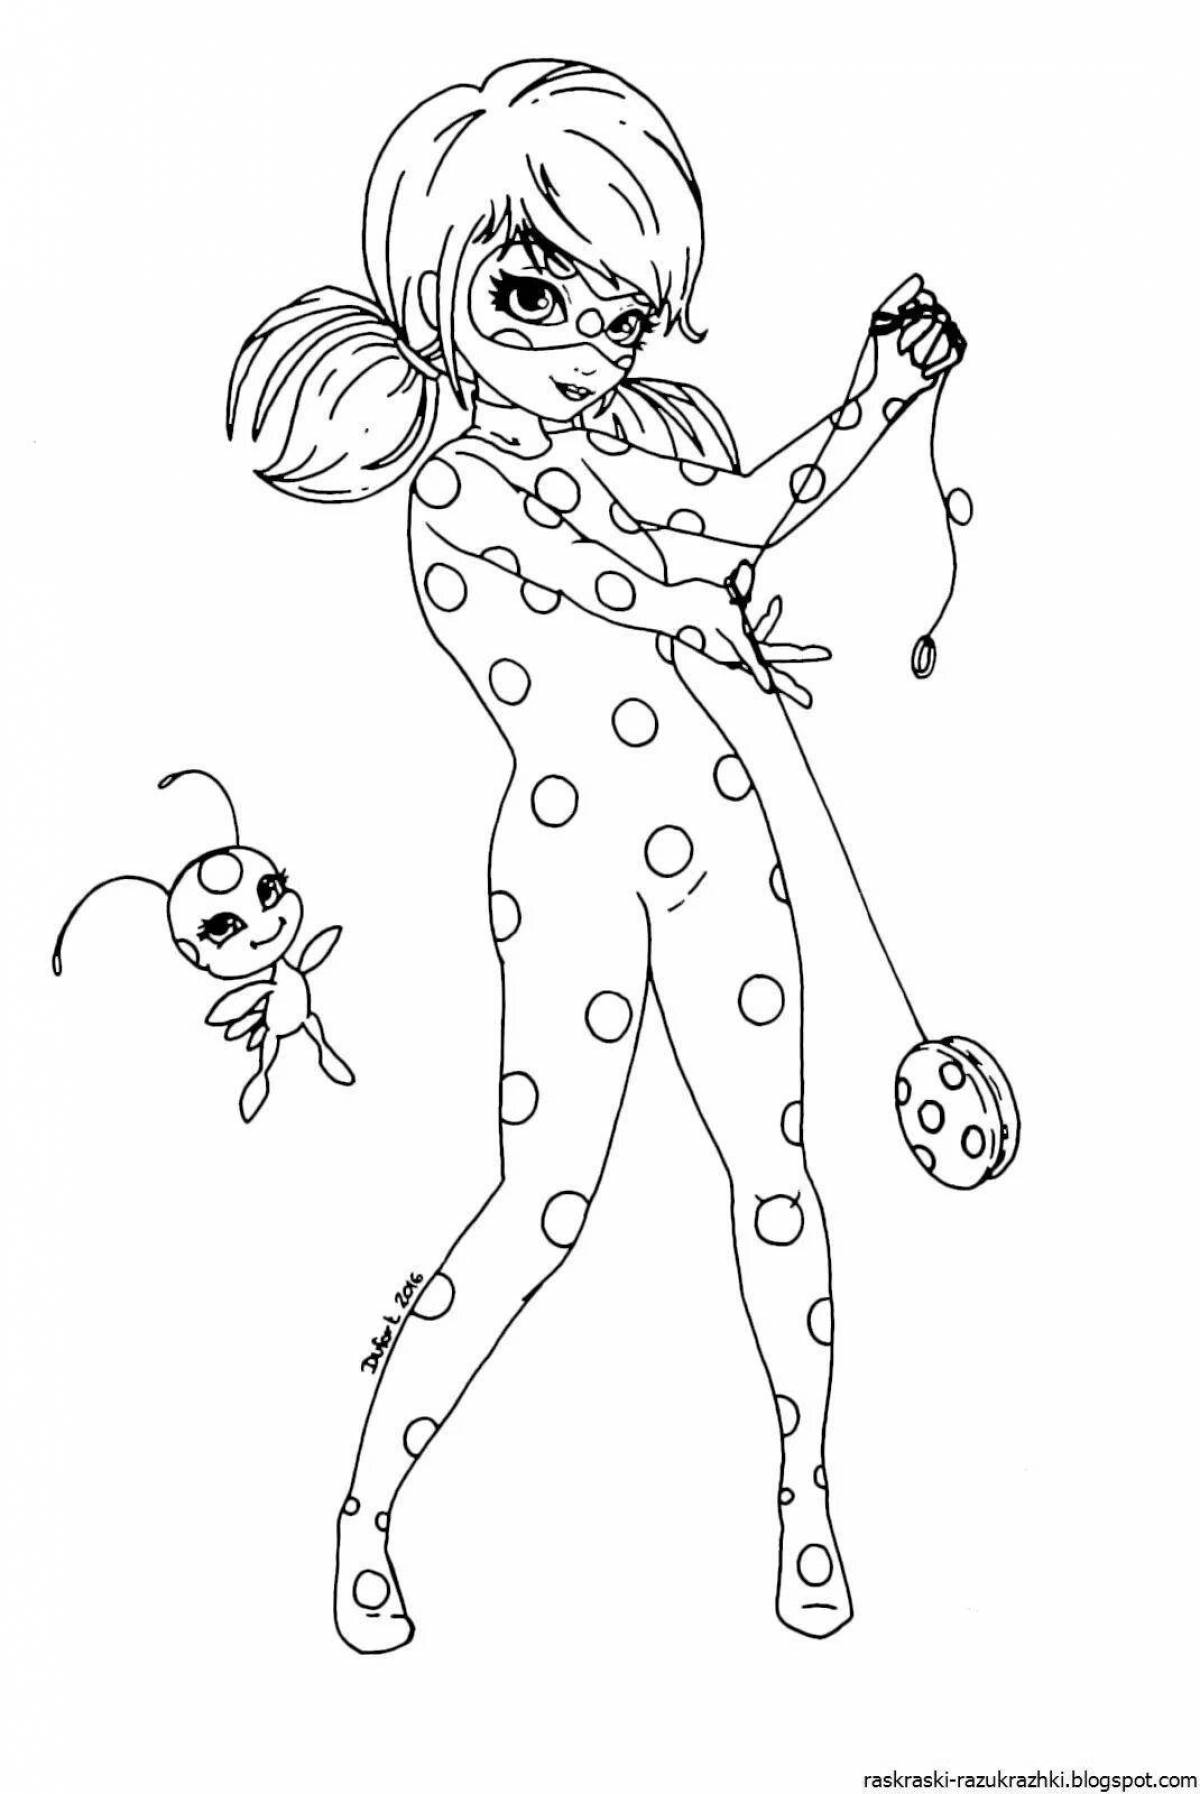 Coloring fairy lady bug and super cat